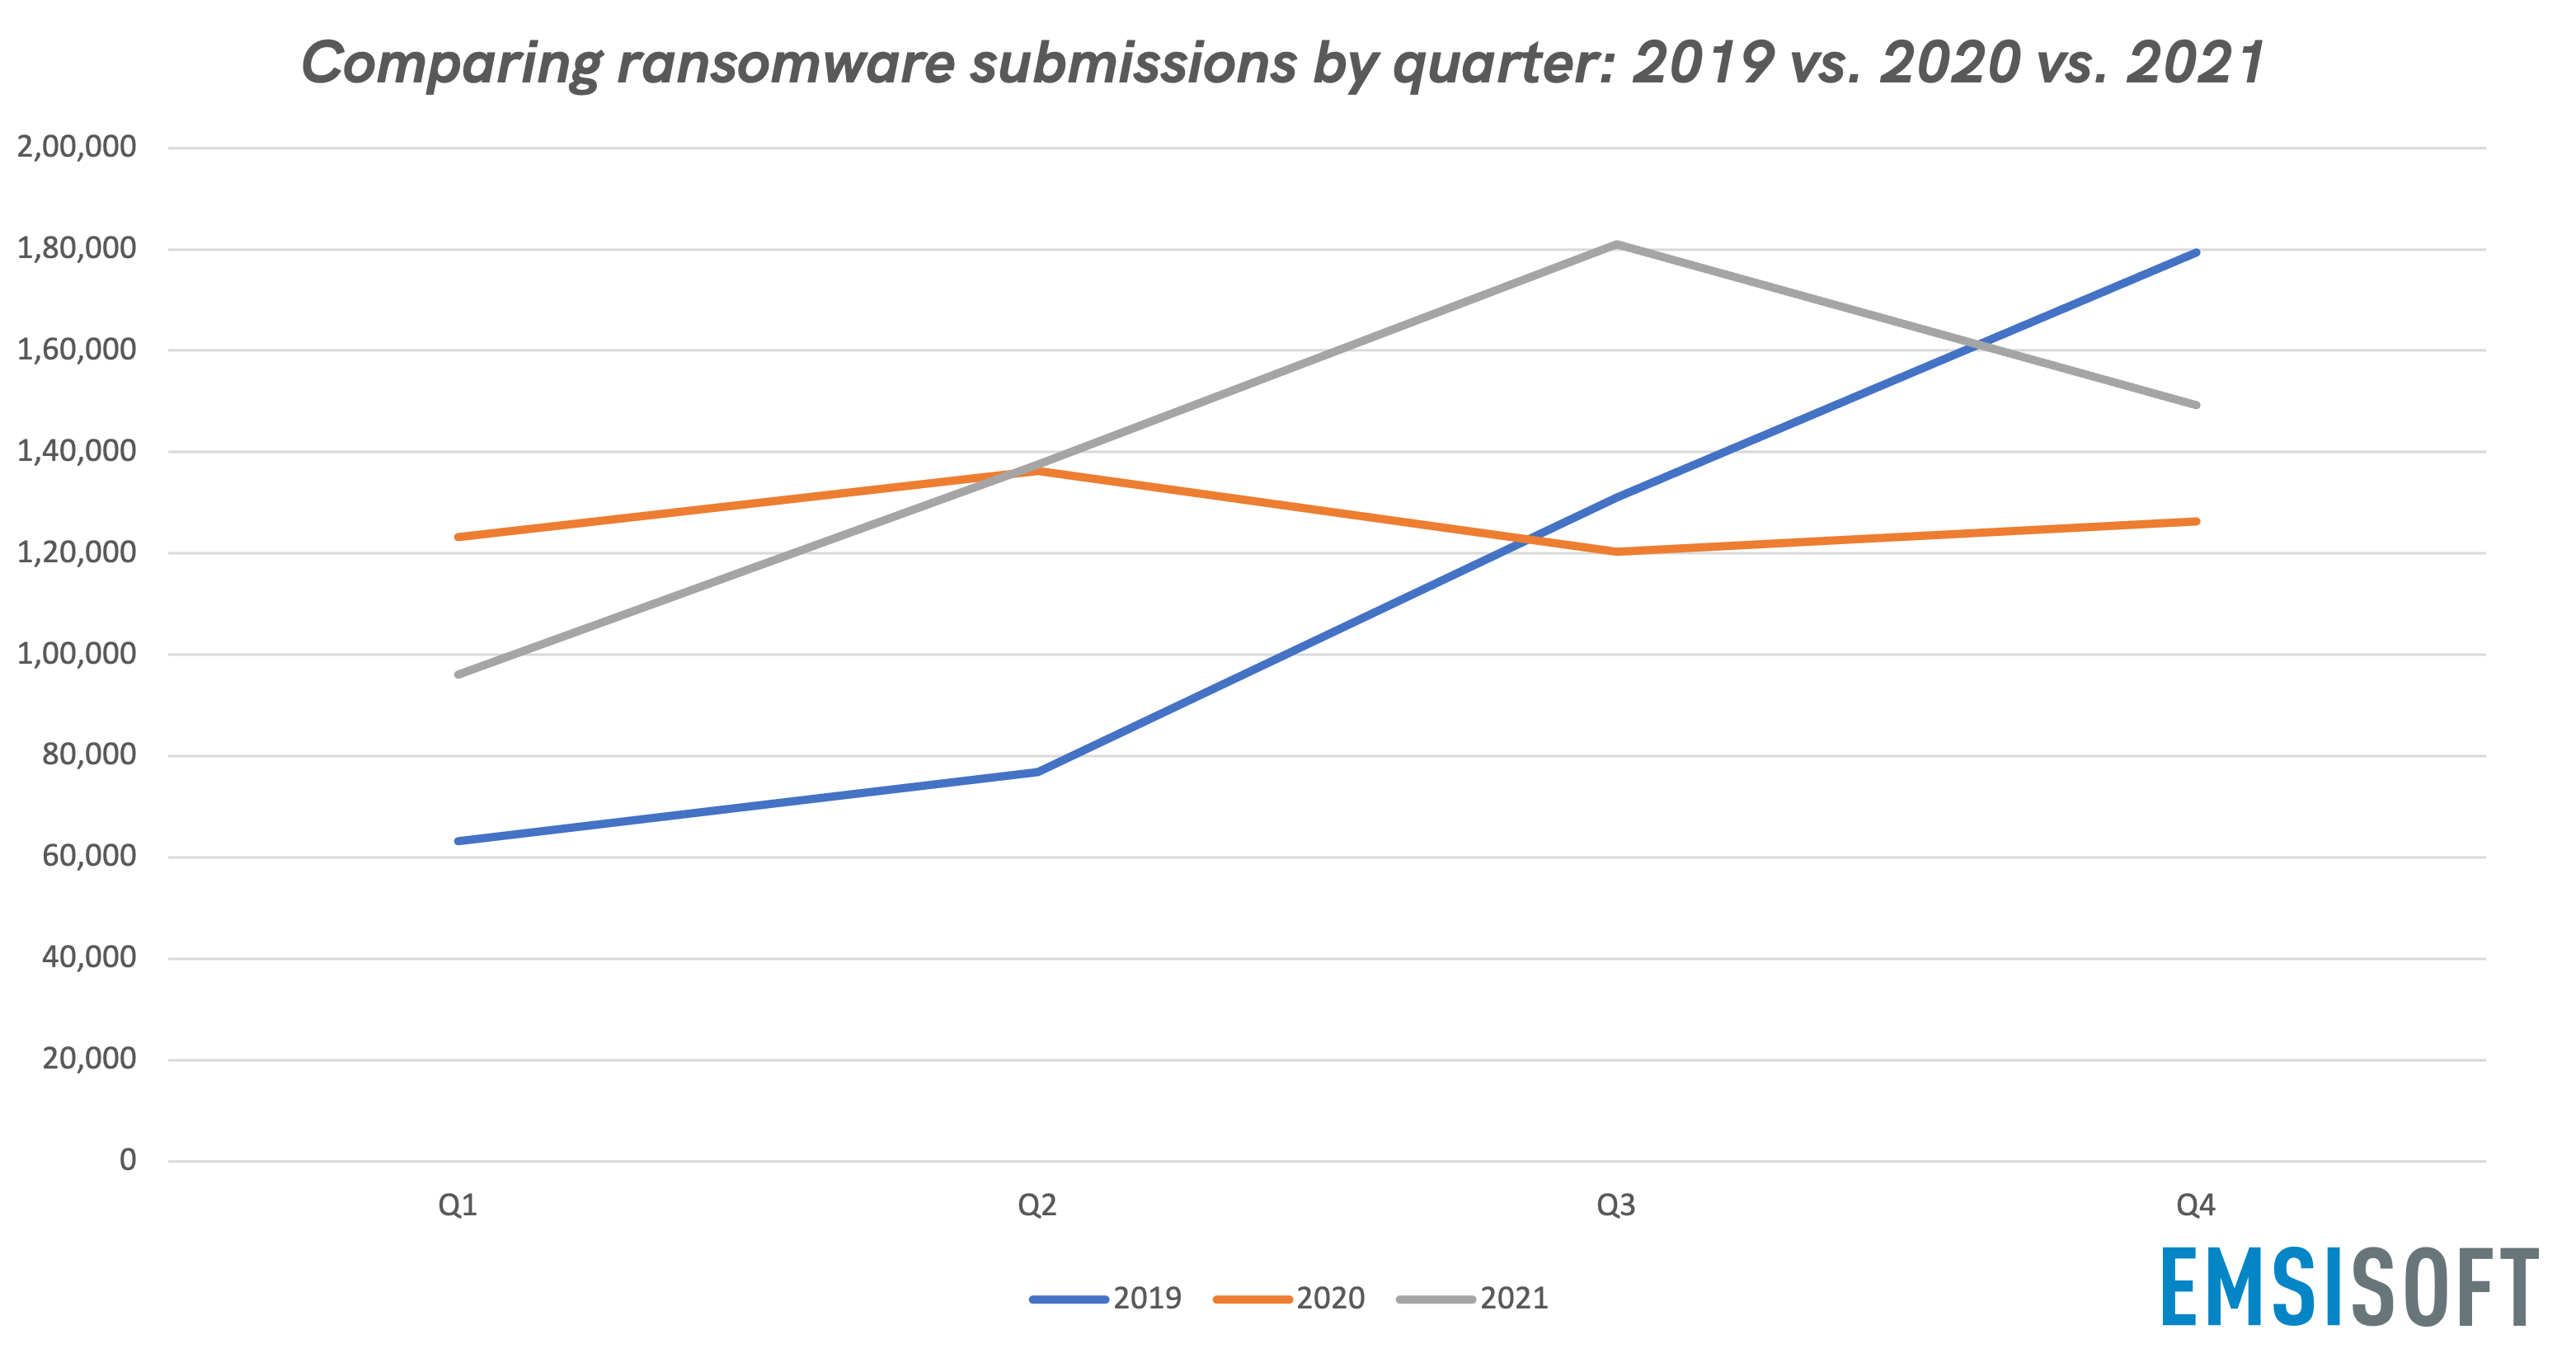 Comparing ransomware submissions by quarter: 2019 vs. 2020 vs. 2021